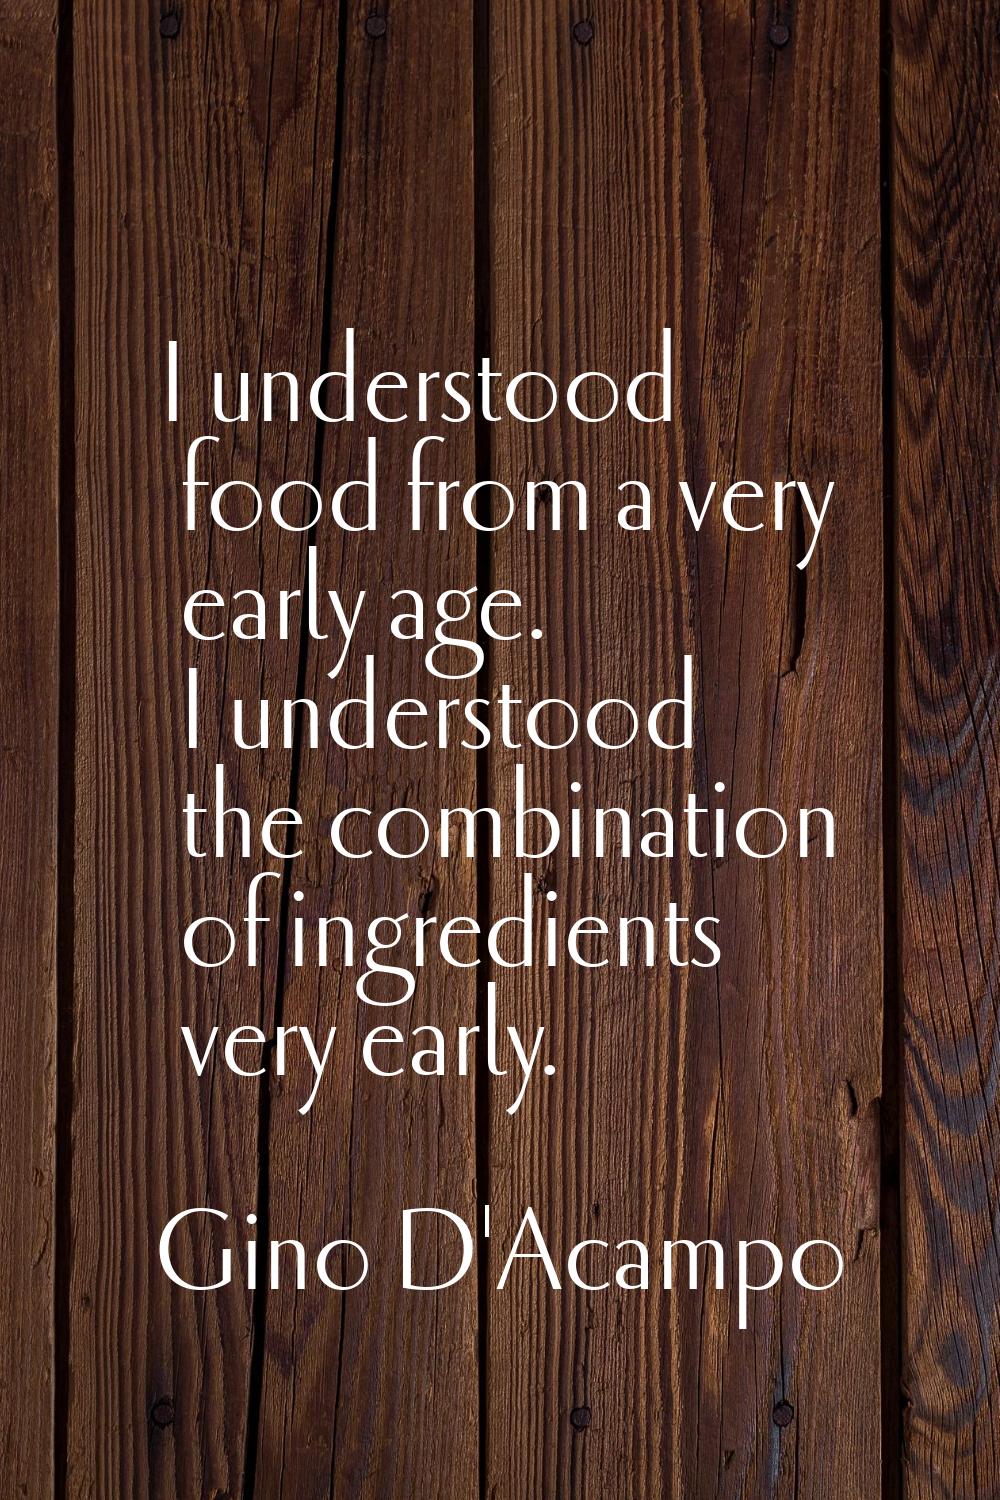 I understood food from a very early age. I understood the combination of ingredients very early.